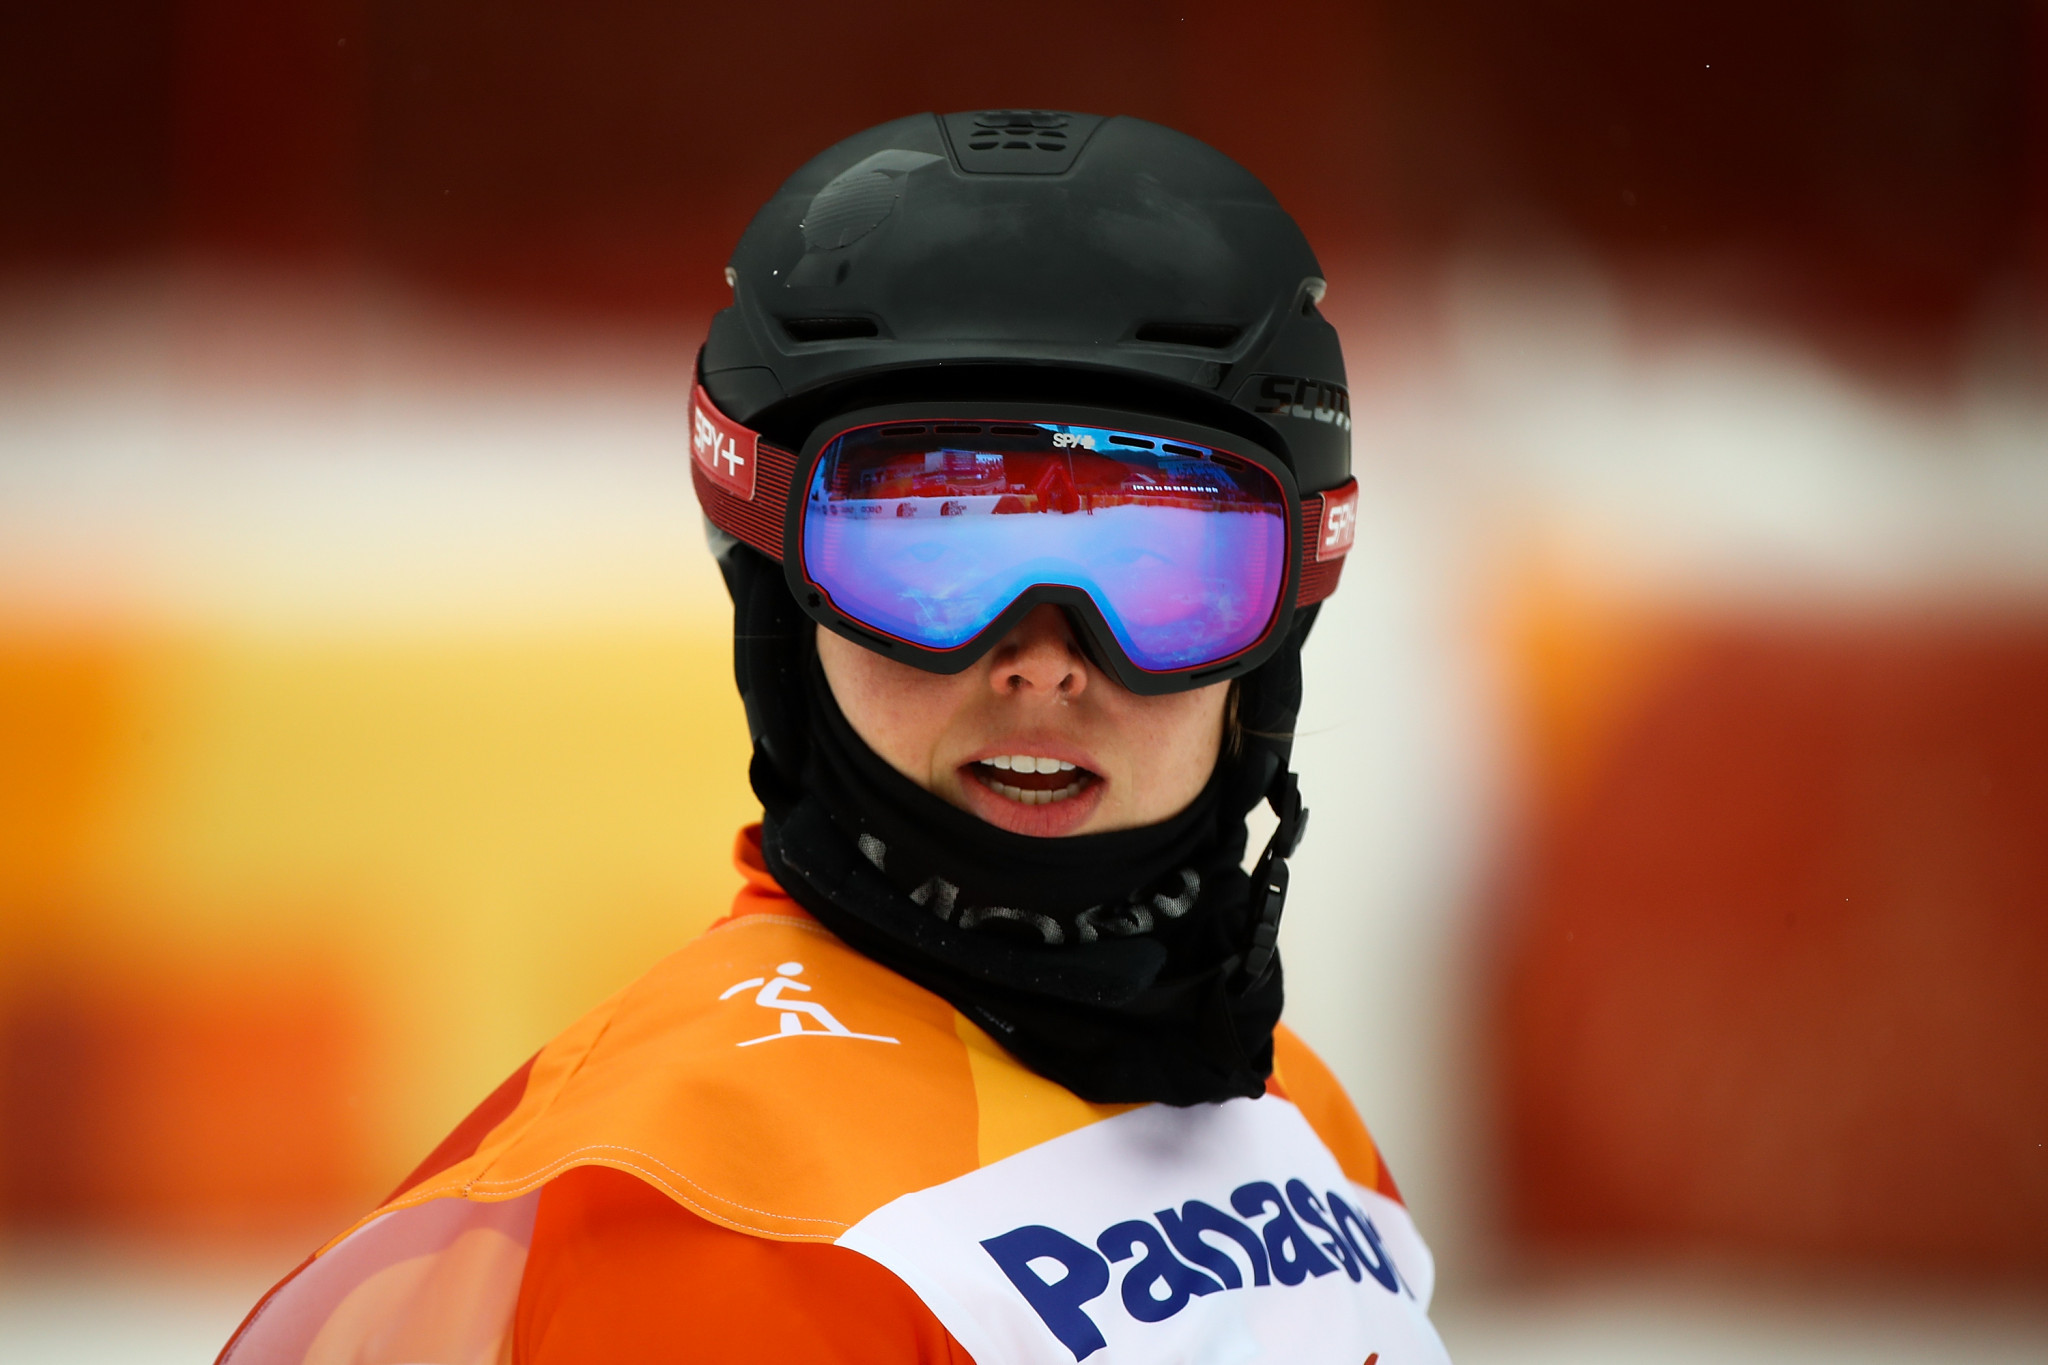 Bunschoten and Vos named Paralympic flag bearers for The Netherlands 